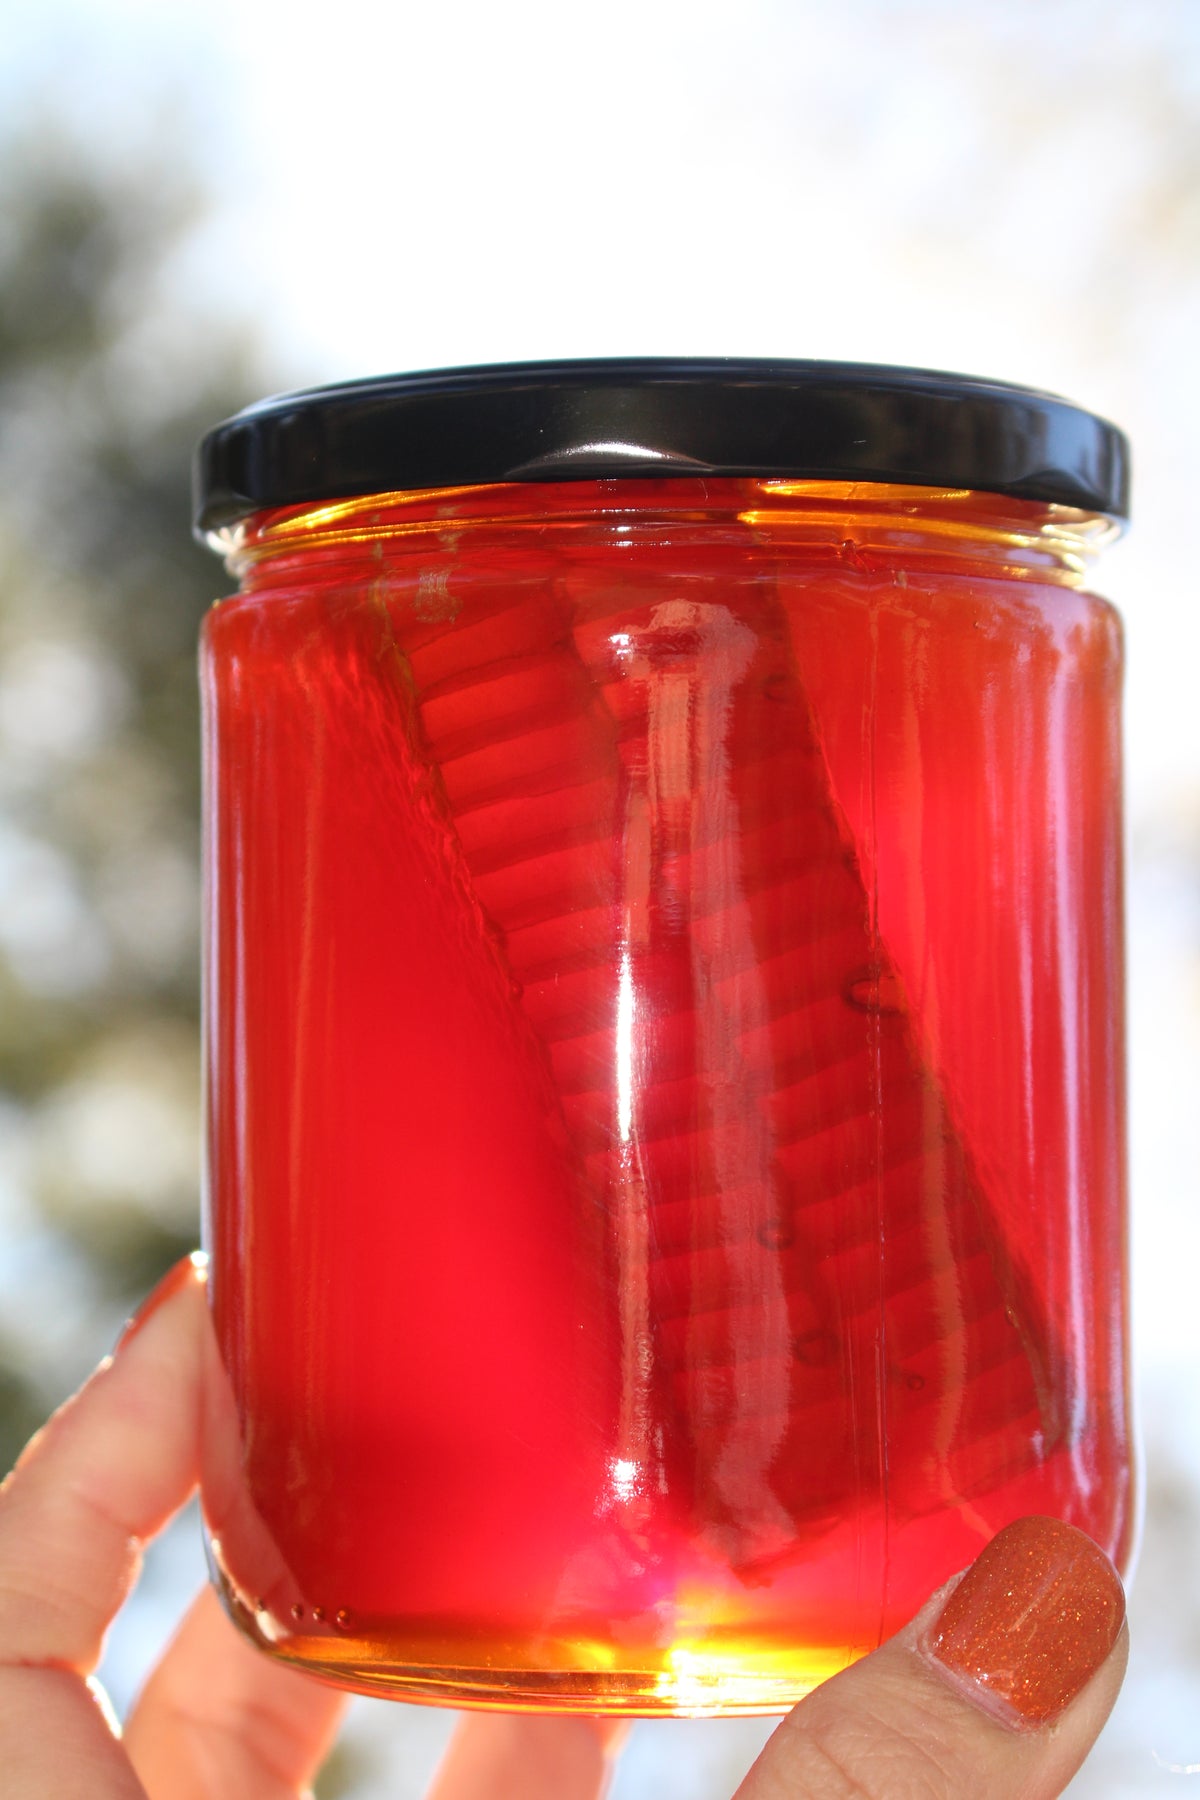 16oz Comb Honey (Chunk of Texas Honey Comb in our Local Fort Bend Honey)